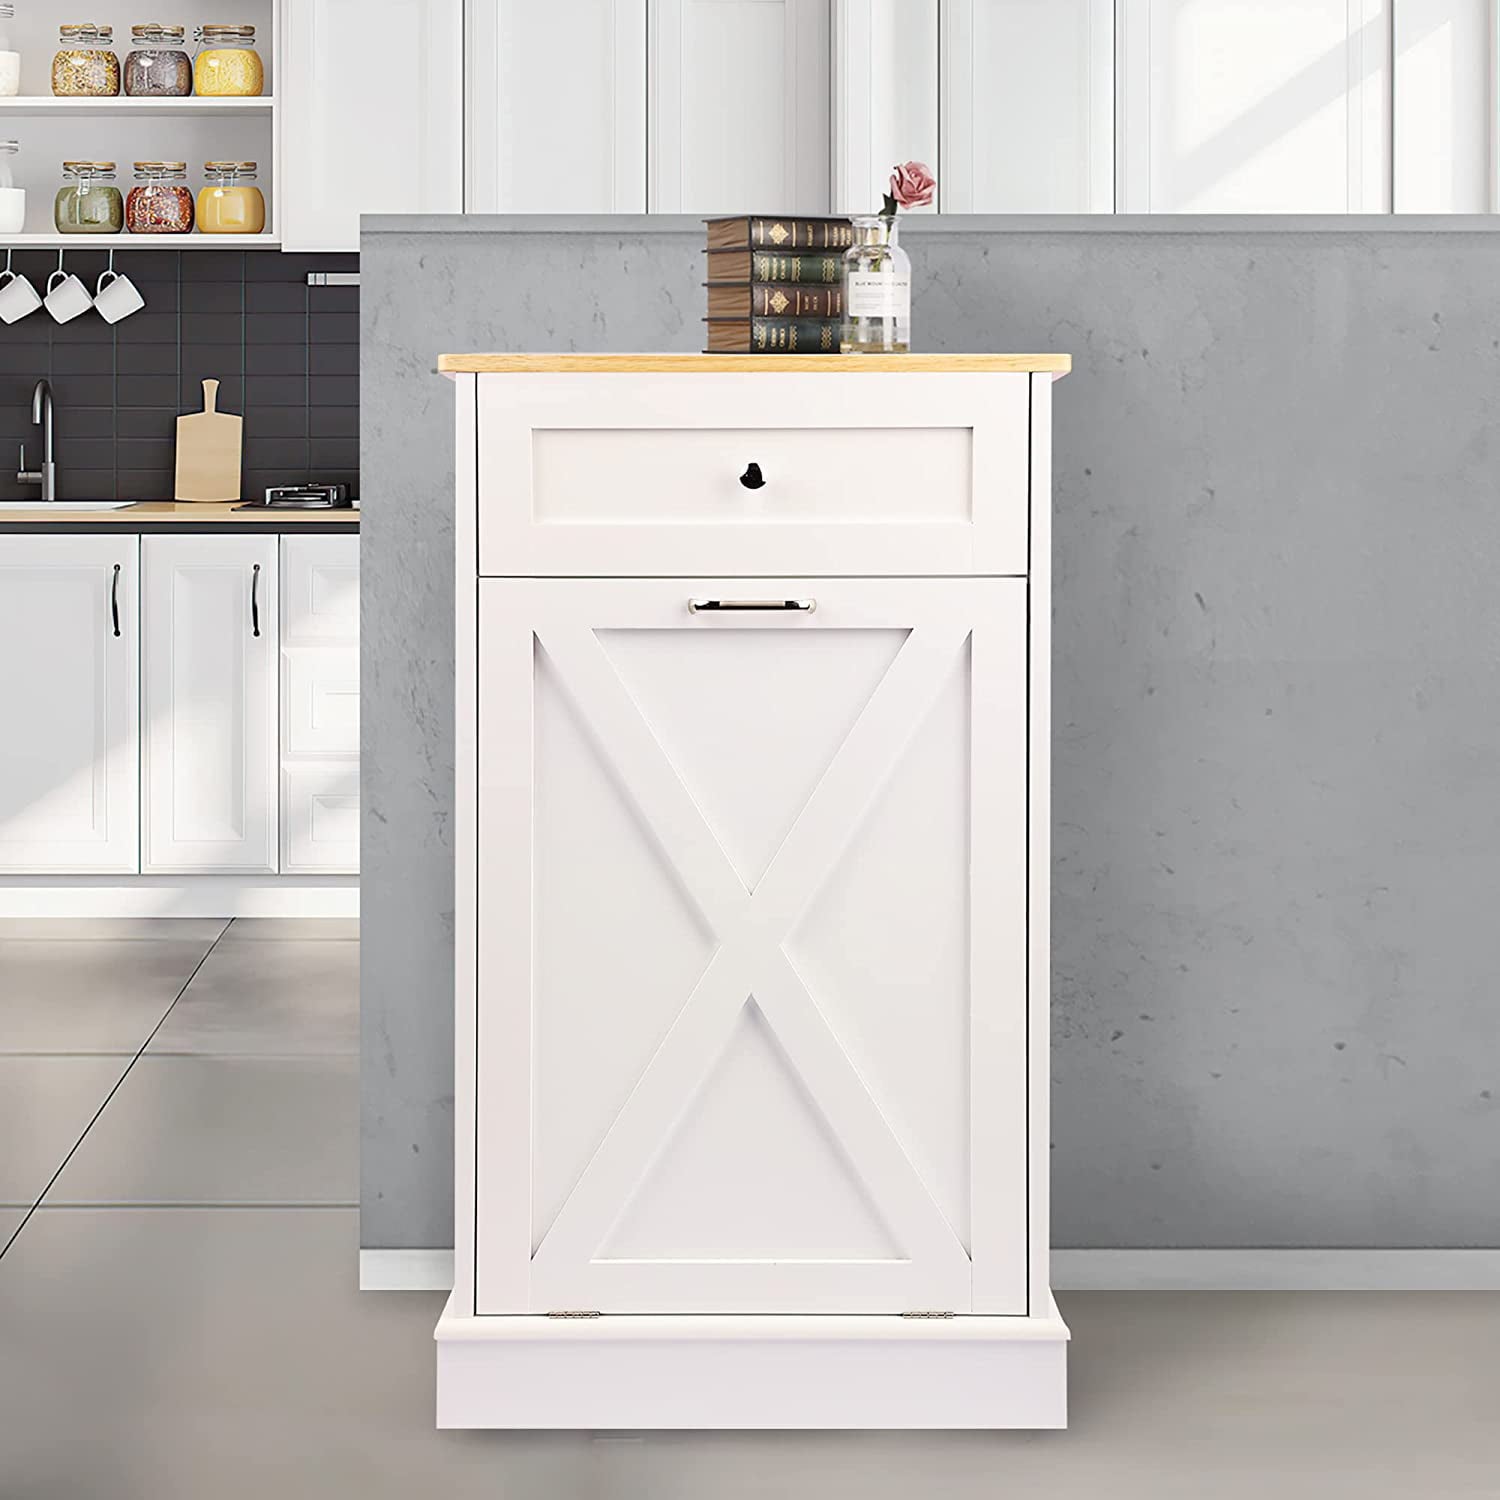 Tilt Out Trash Cabinet，Antique-style Barn Door Kitchen Island with Solid Wood Tabletop and Drawer， Pet Proof Trash Can， Wood Laundry Cabinet